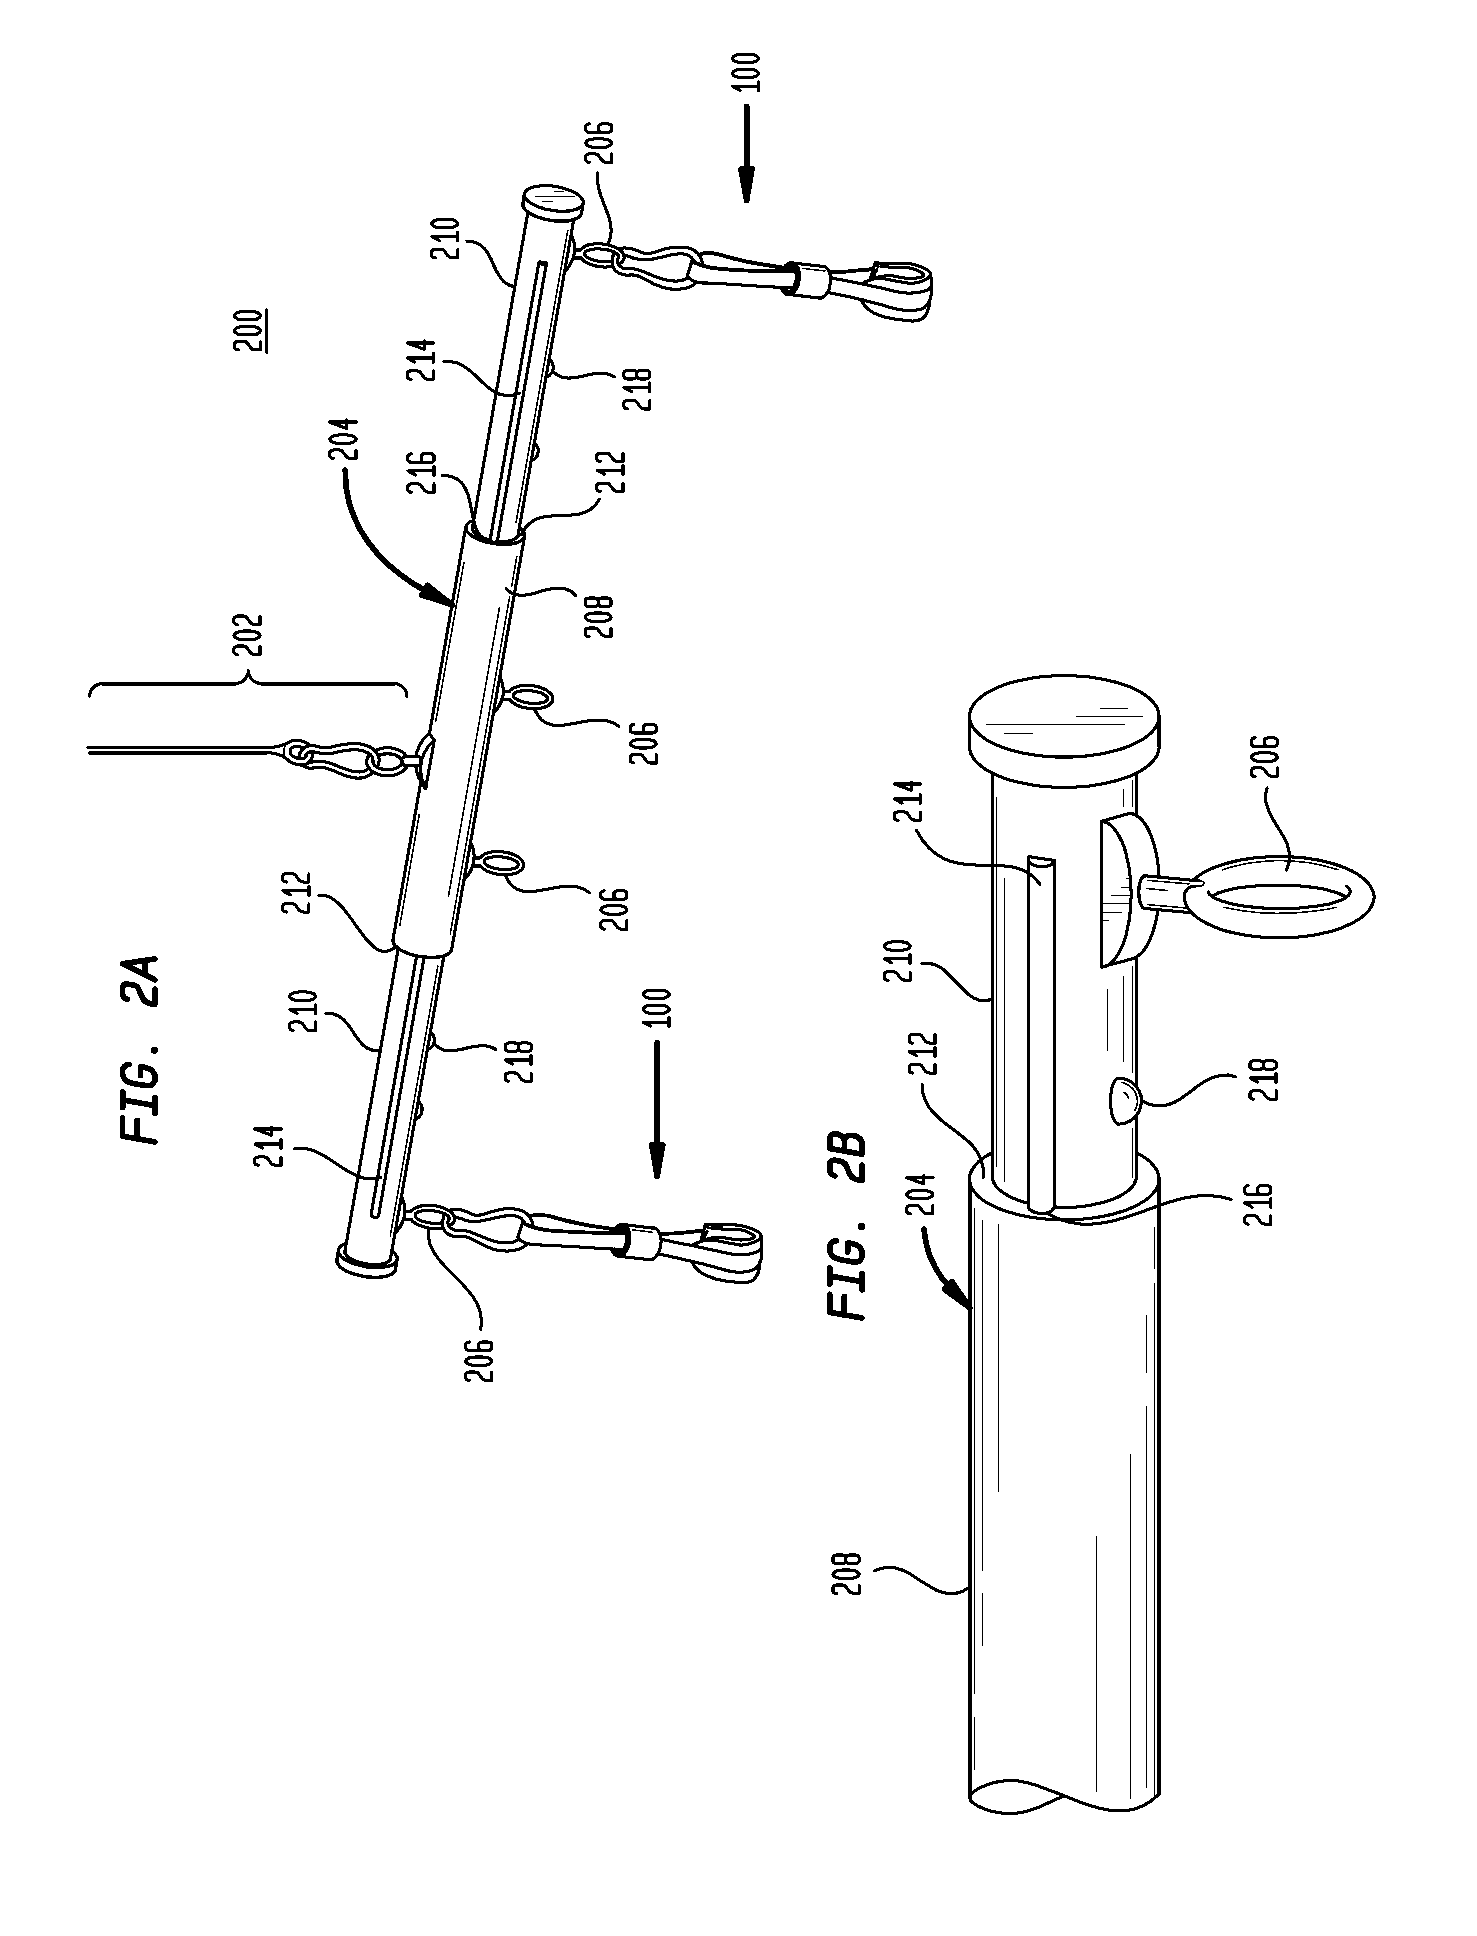 Apparatus and method for lifting weights